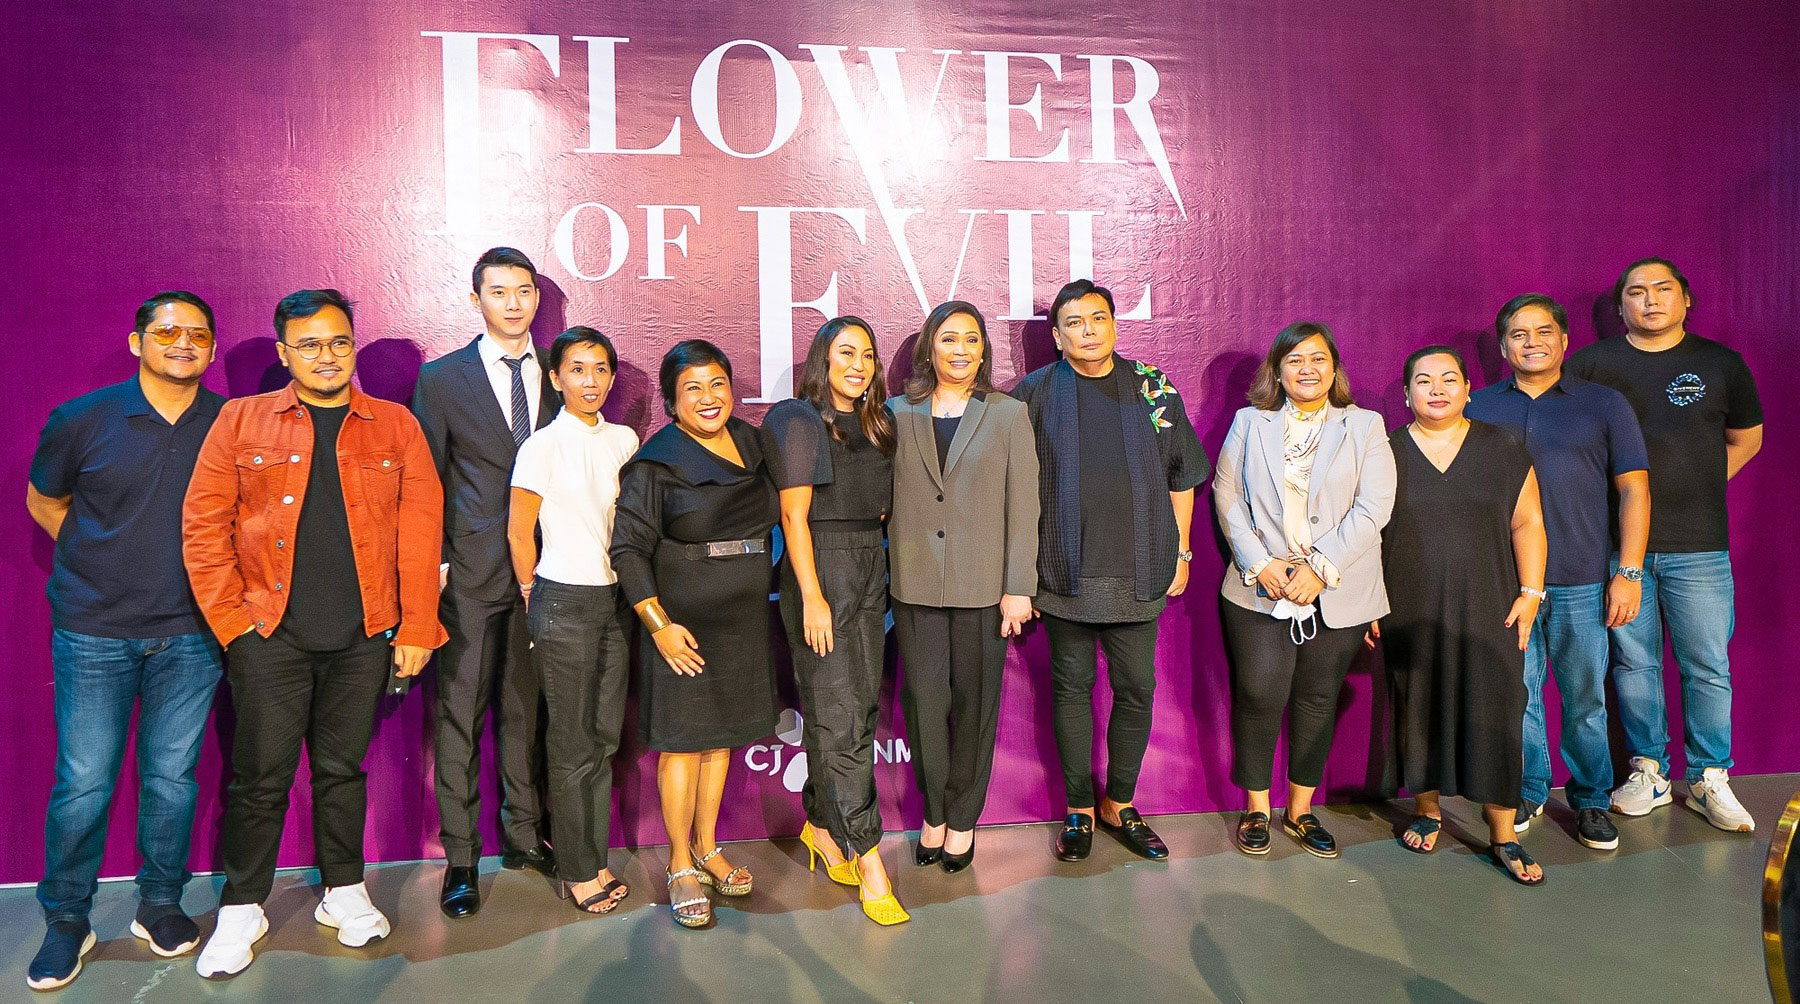 Executives of Viu Philippines, led by country manager Arianne Kader-Cu, and the creative and productions teams of “Flower of Evil,” headed by ABS-CBN COO Cory Vidanes, pose together. ABS-CBN